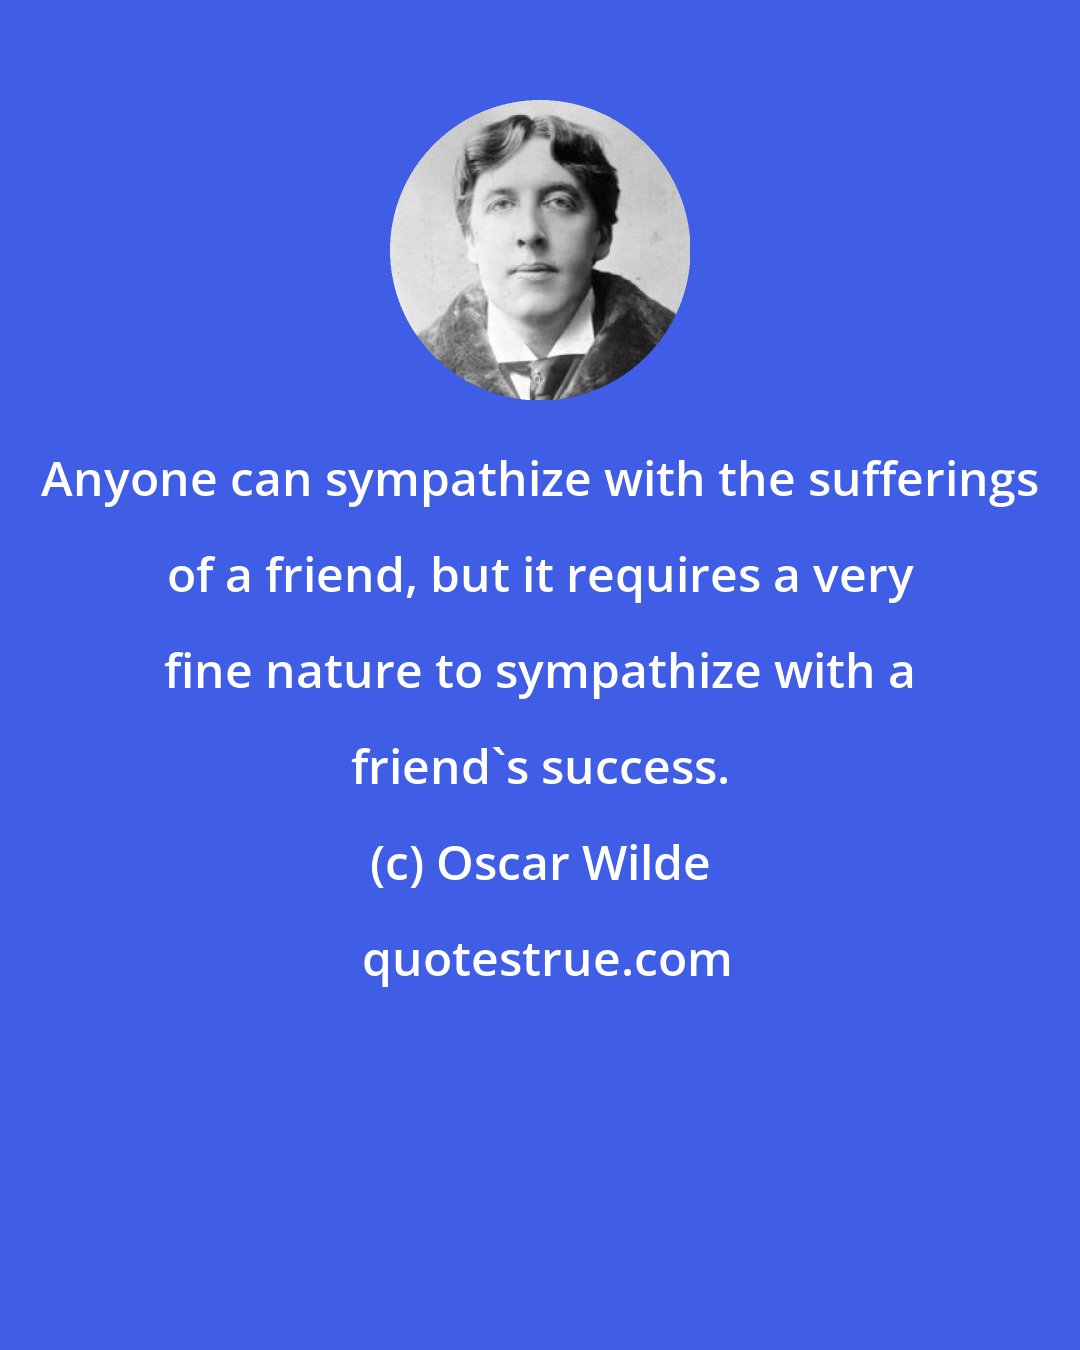 Oscar Wilde: Anyone can sympathize with the sufferings of a friend, but it requires a very fine nature to sympathize with a friend's success.